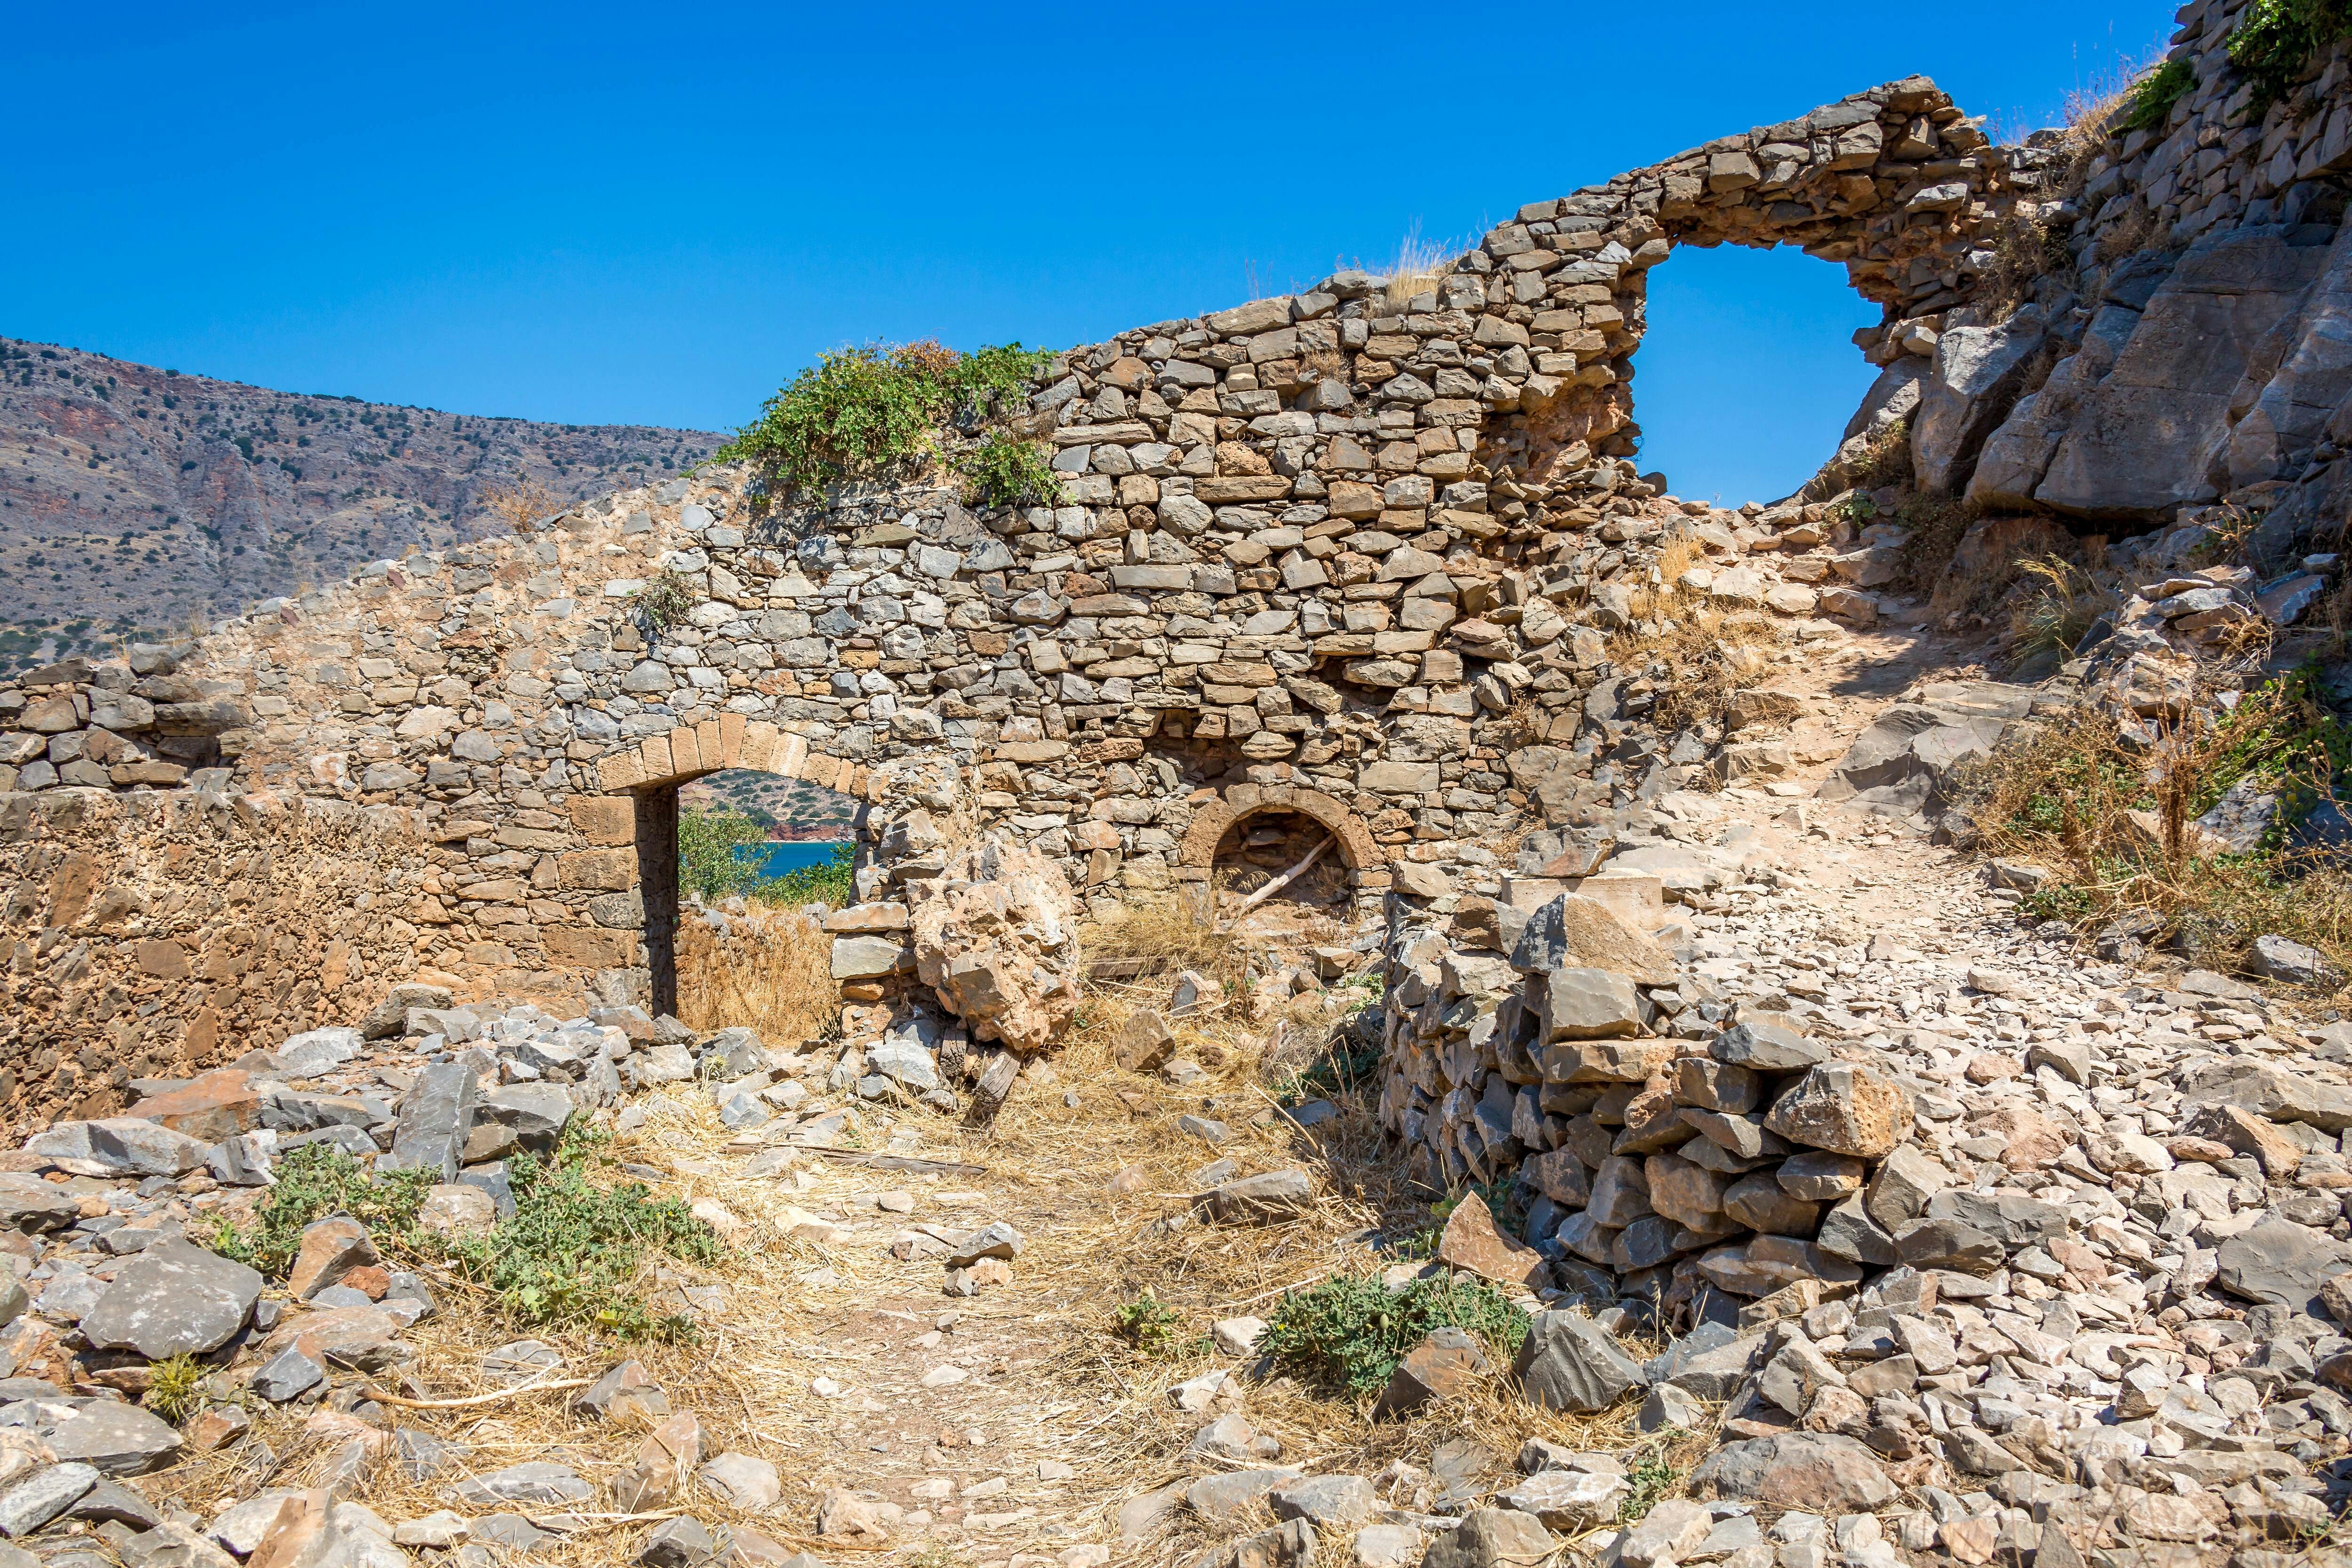 Spinalonga - ticket only